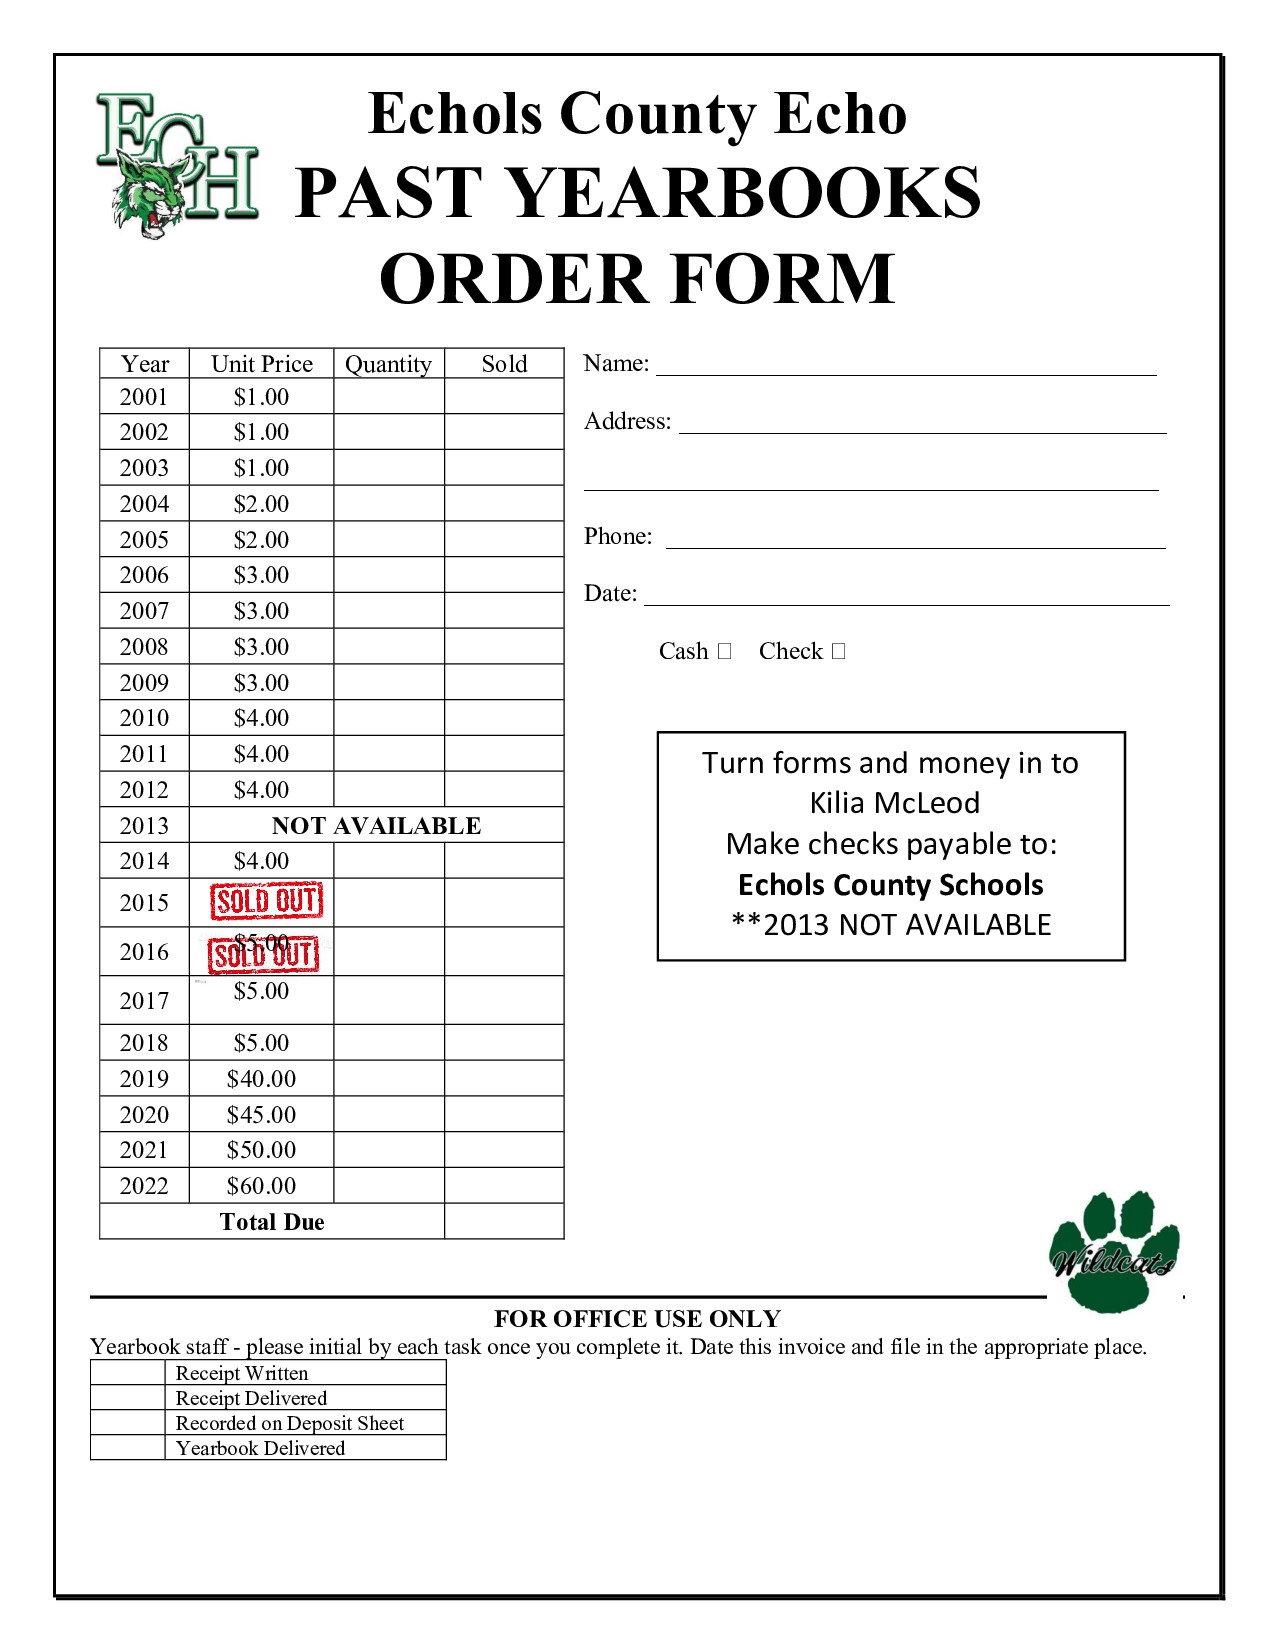 Previous Yearbooks Order Form